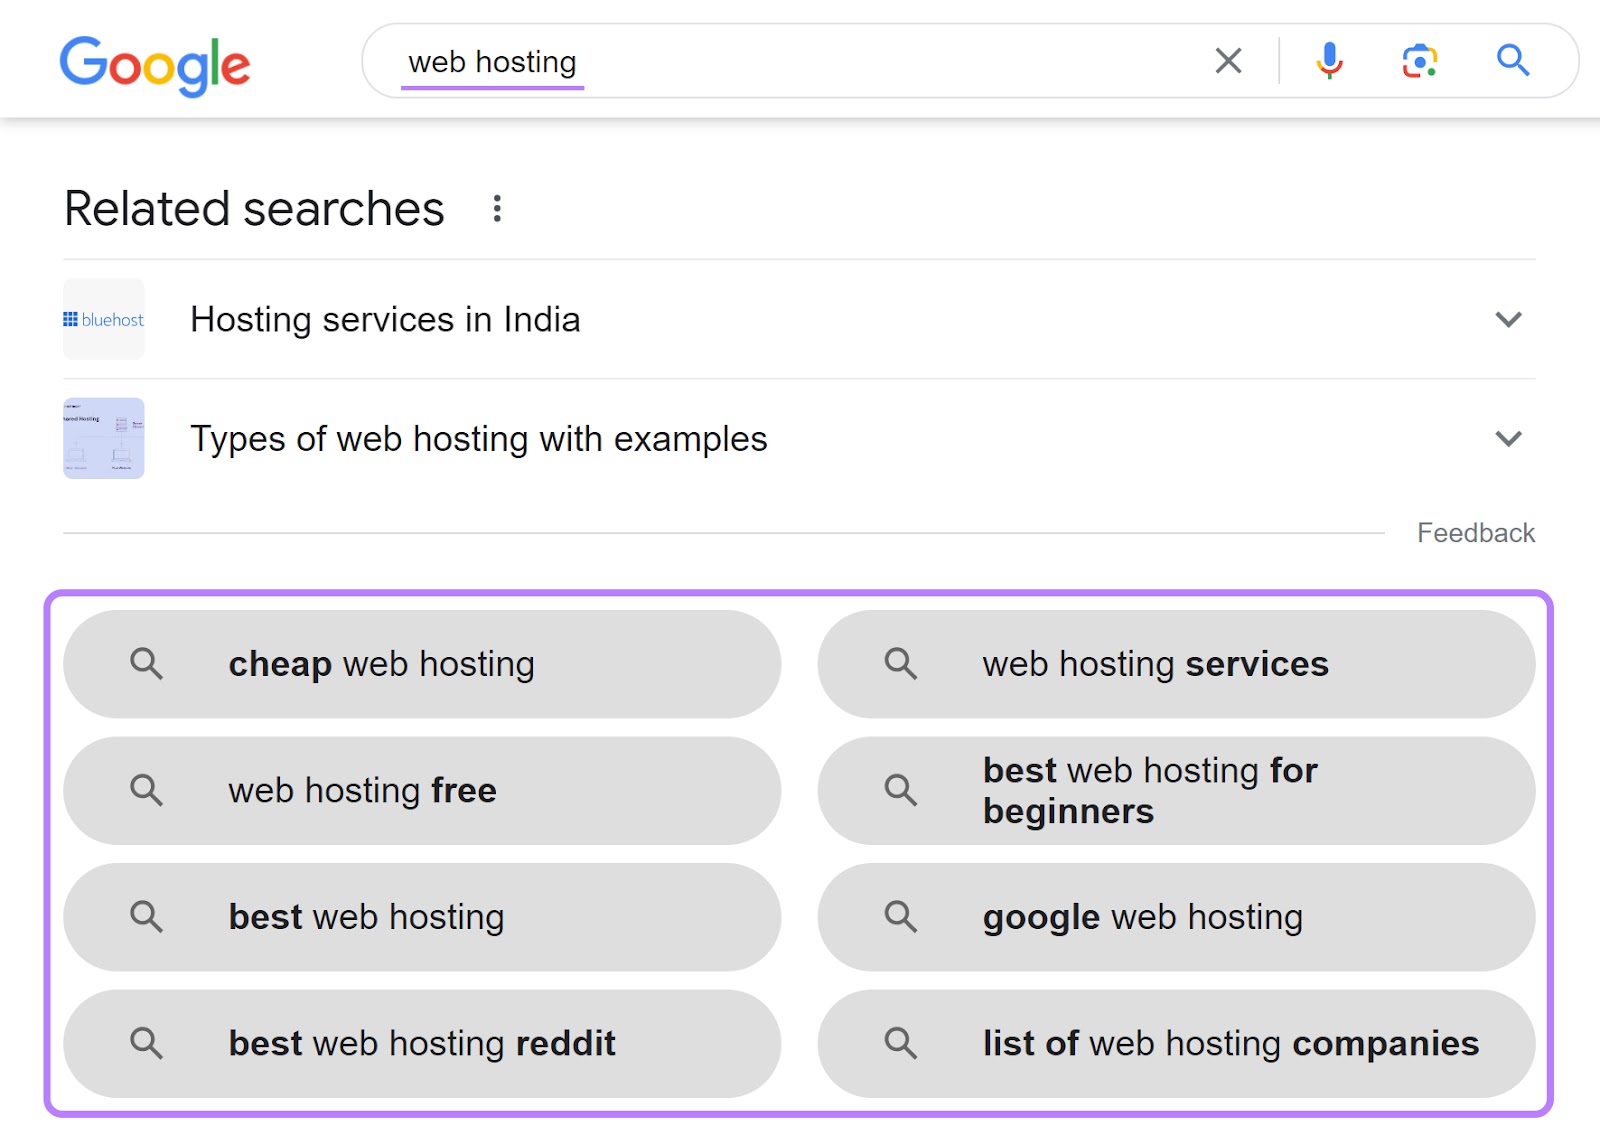 Google's "Related searches" section for "web hosting" search